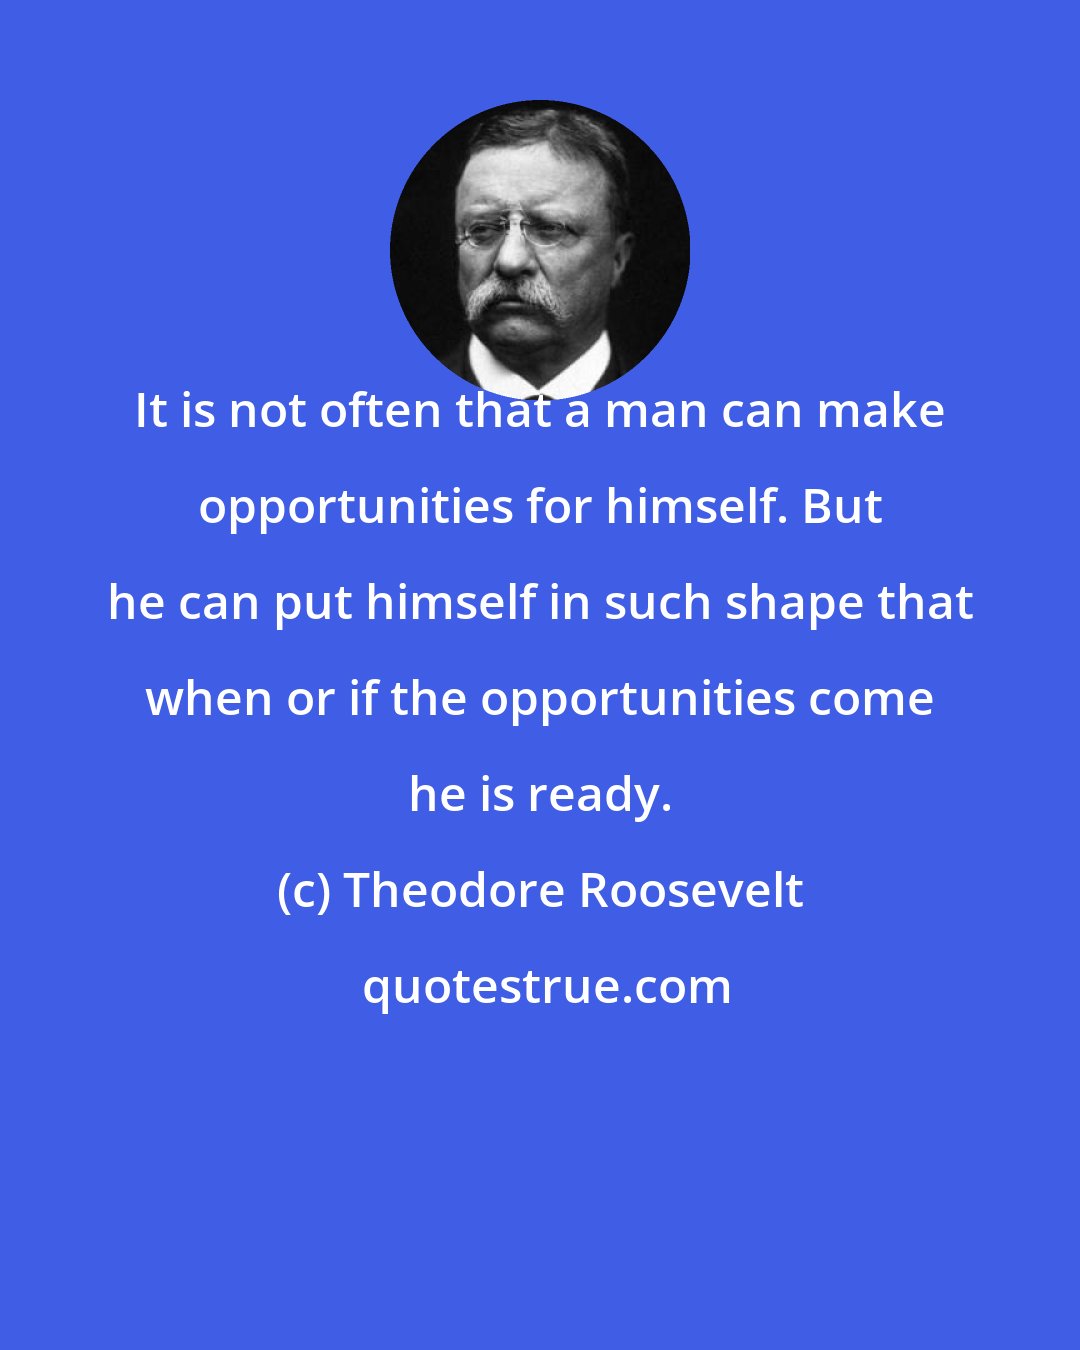 Theodore Roosevelt: It is not often that a man can make opportunities for himself. But he can put himself in such shape that when or if the opportunities come he is ready.